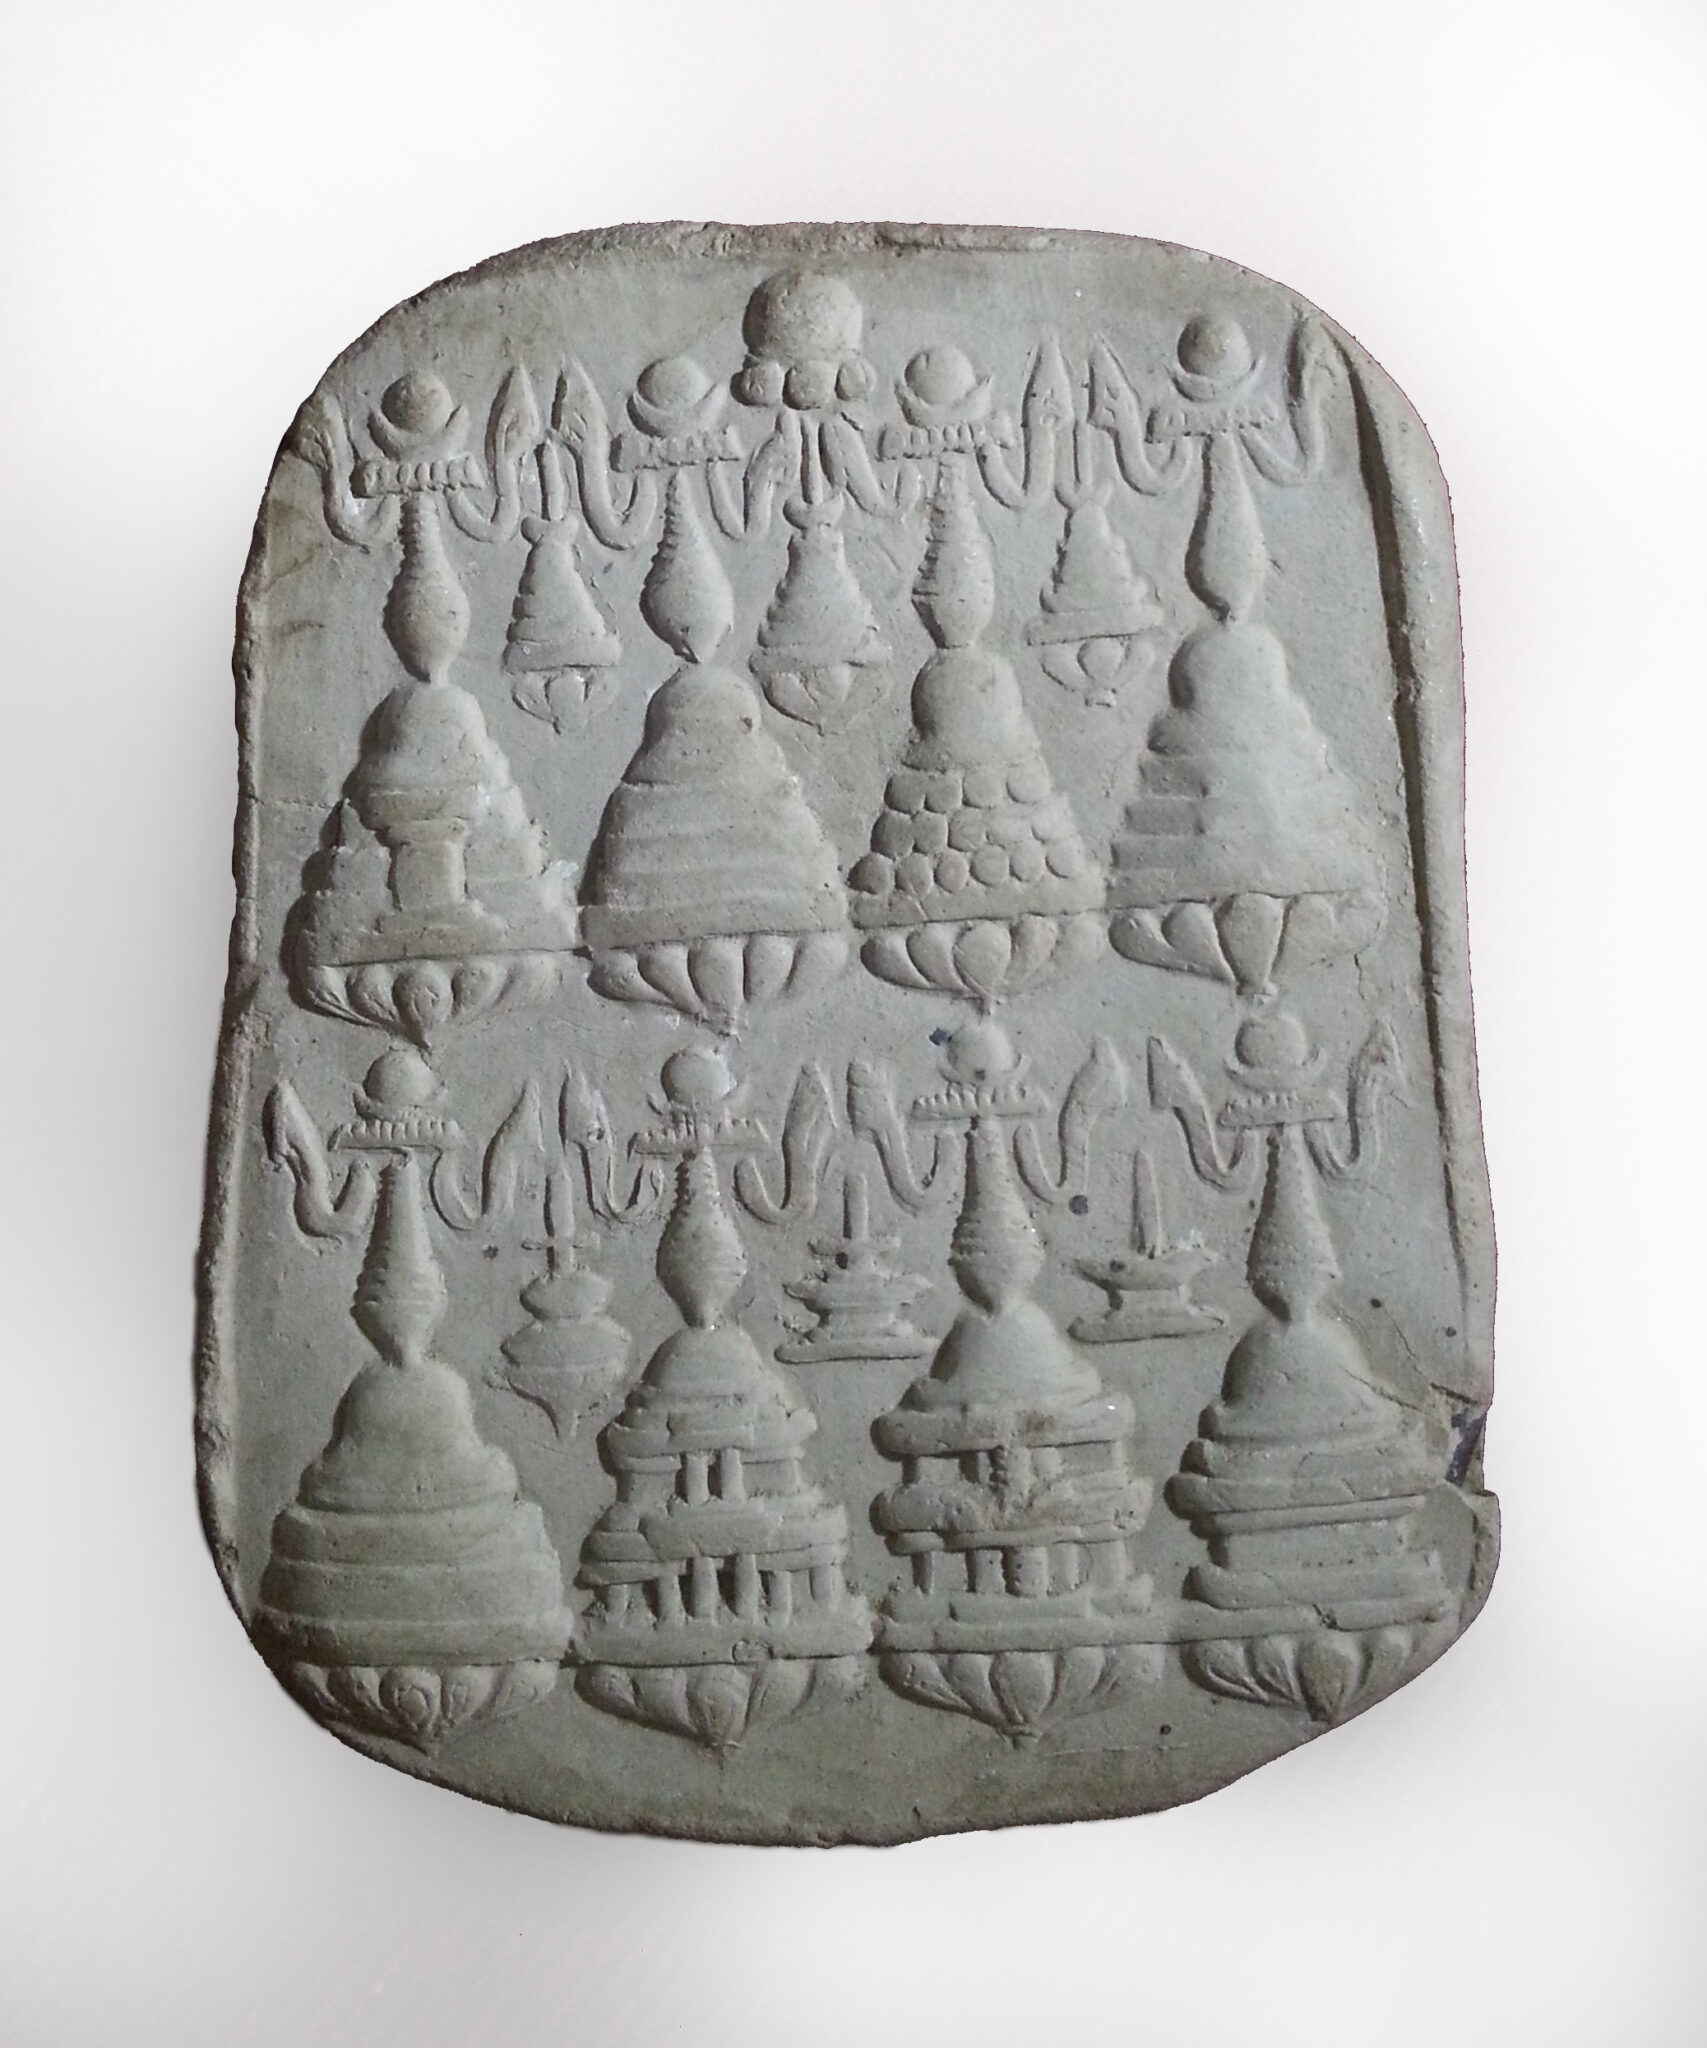 Molded relief featuring two rows of four stupas, each with different patterns around bases